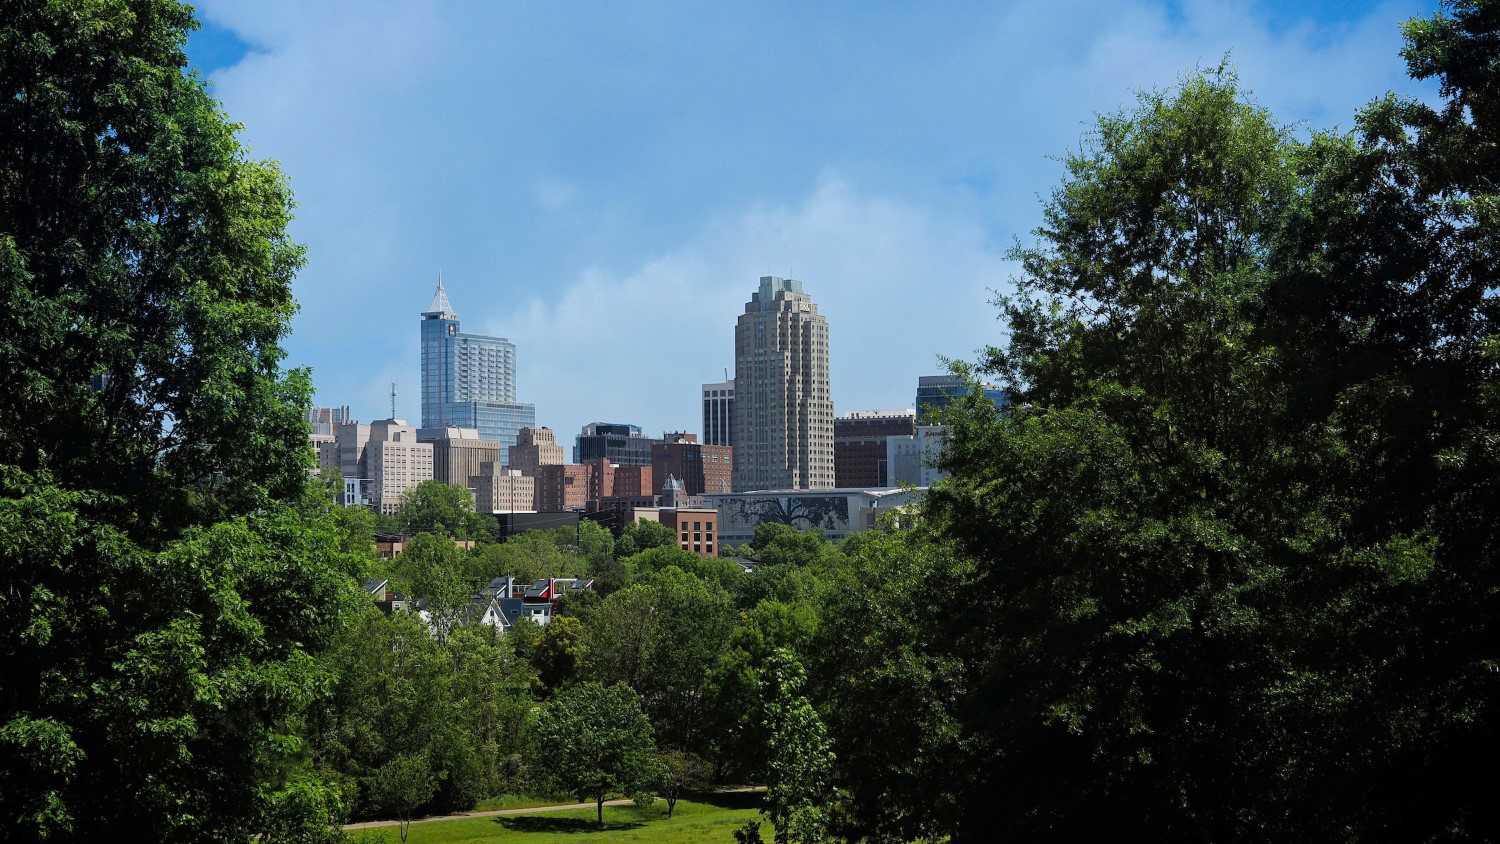 A view of the Raleigh skyline